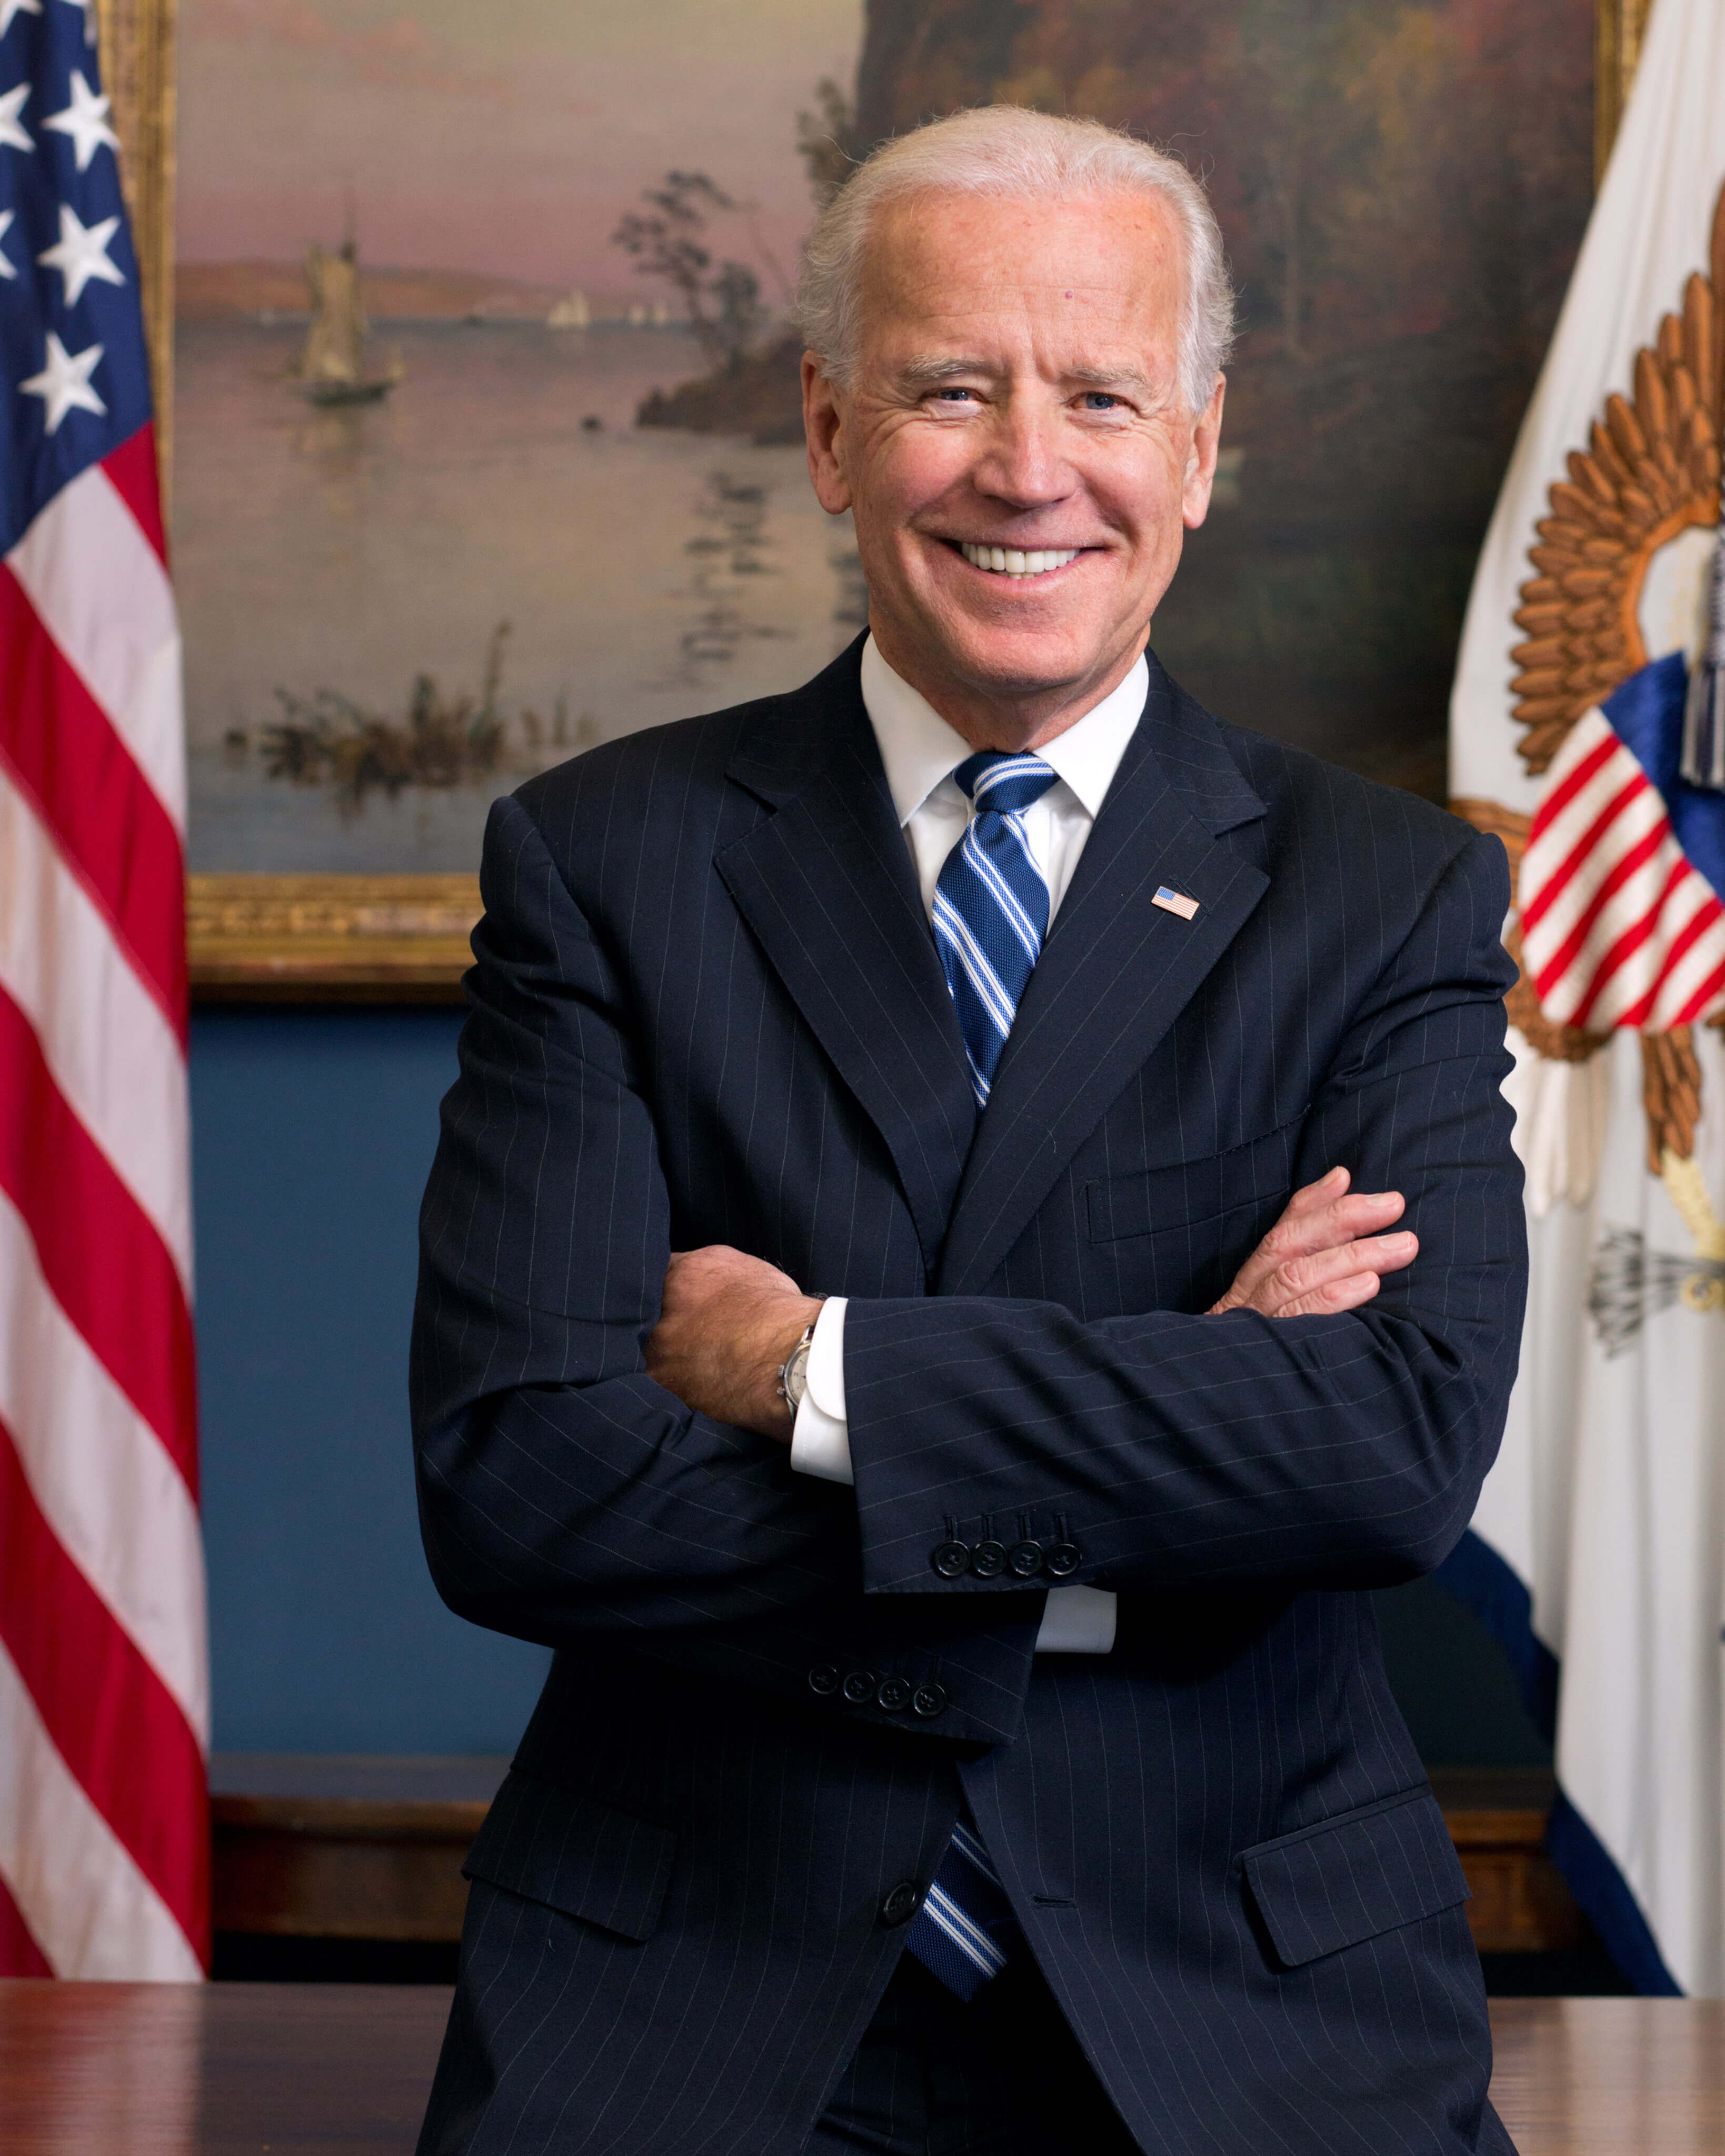 Official portrait photo of Joe Biden, arms crossed in a dark blue suit as he leans against a desk with a US flag to his right